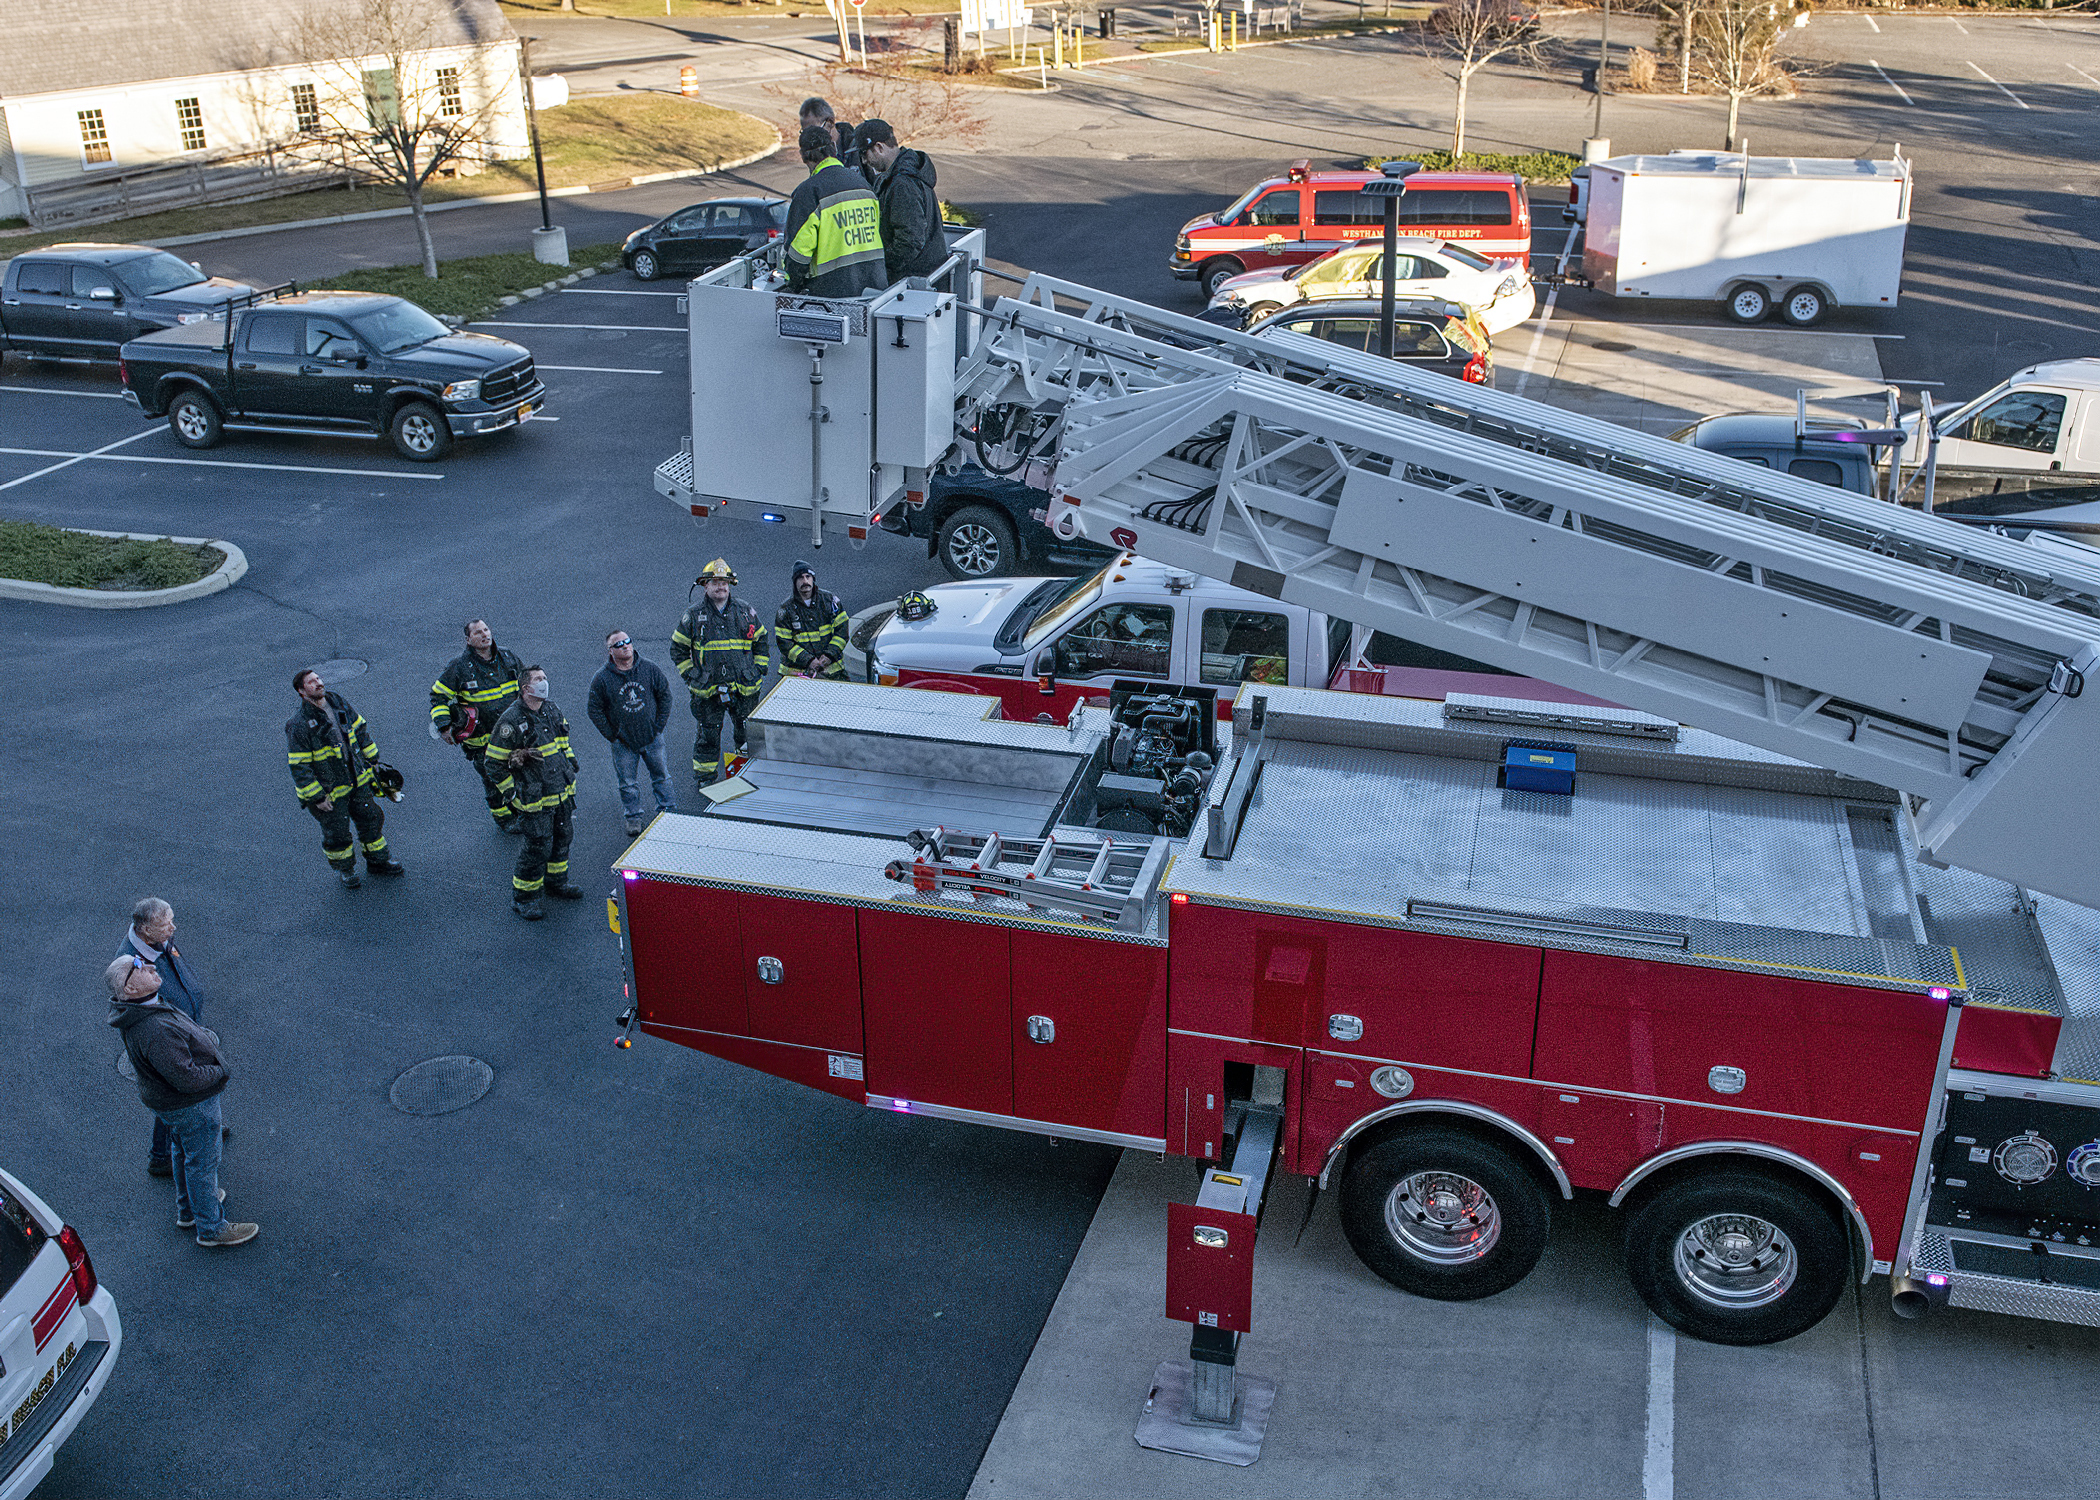 The volunteers fly the tower fo the first time on the Westhampton Beach Fire Department’s new Rosenbauer tower ladder on Monday, December 20.  COURTESY WESTHAMPTON BEACH FIRE DEPARTMENT